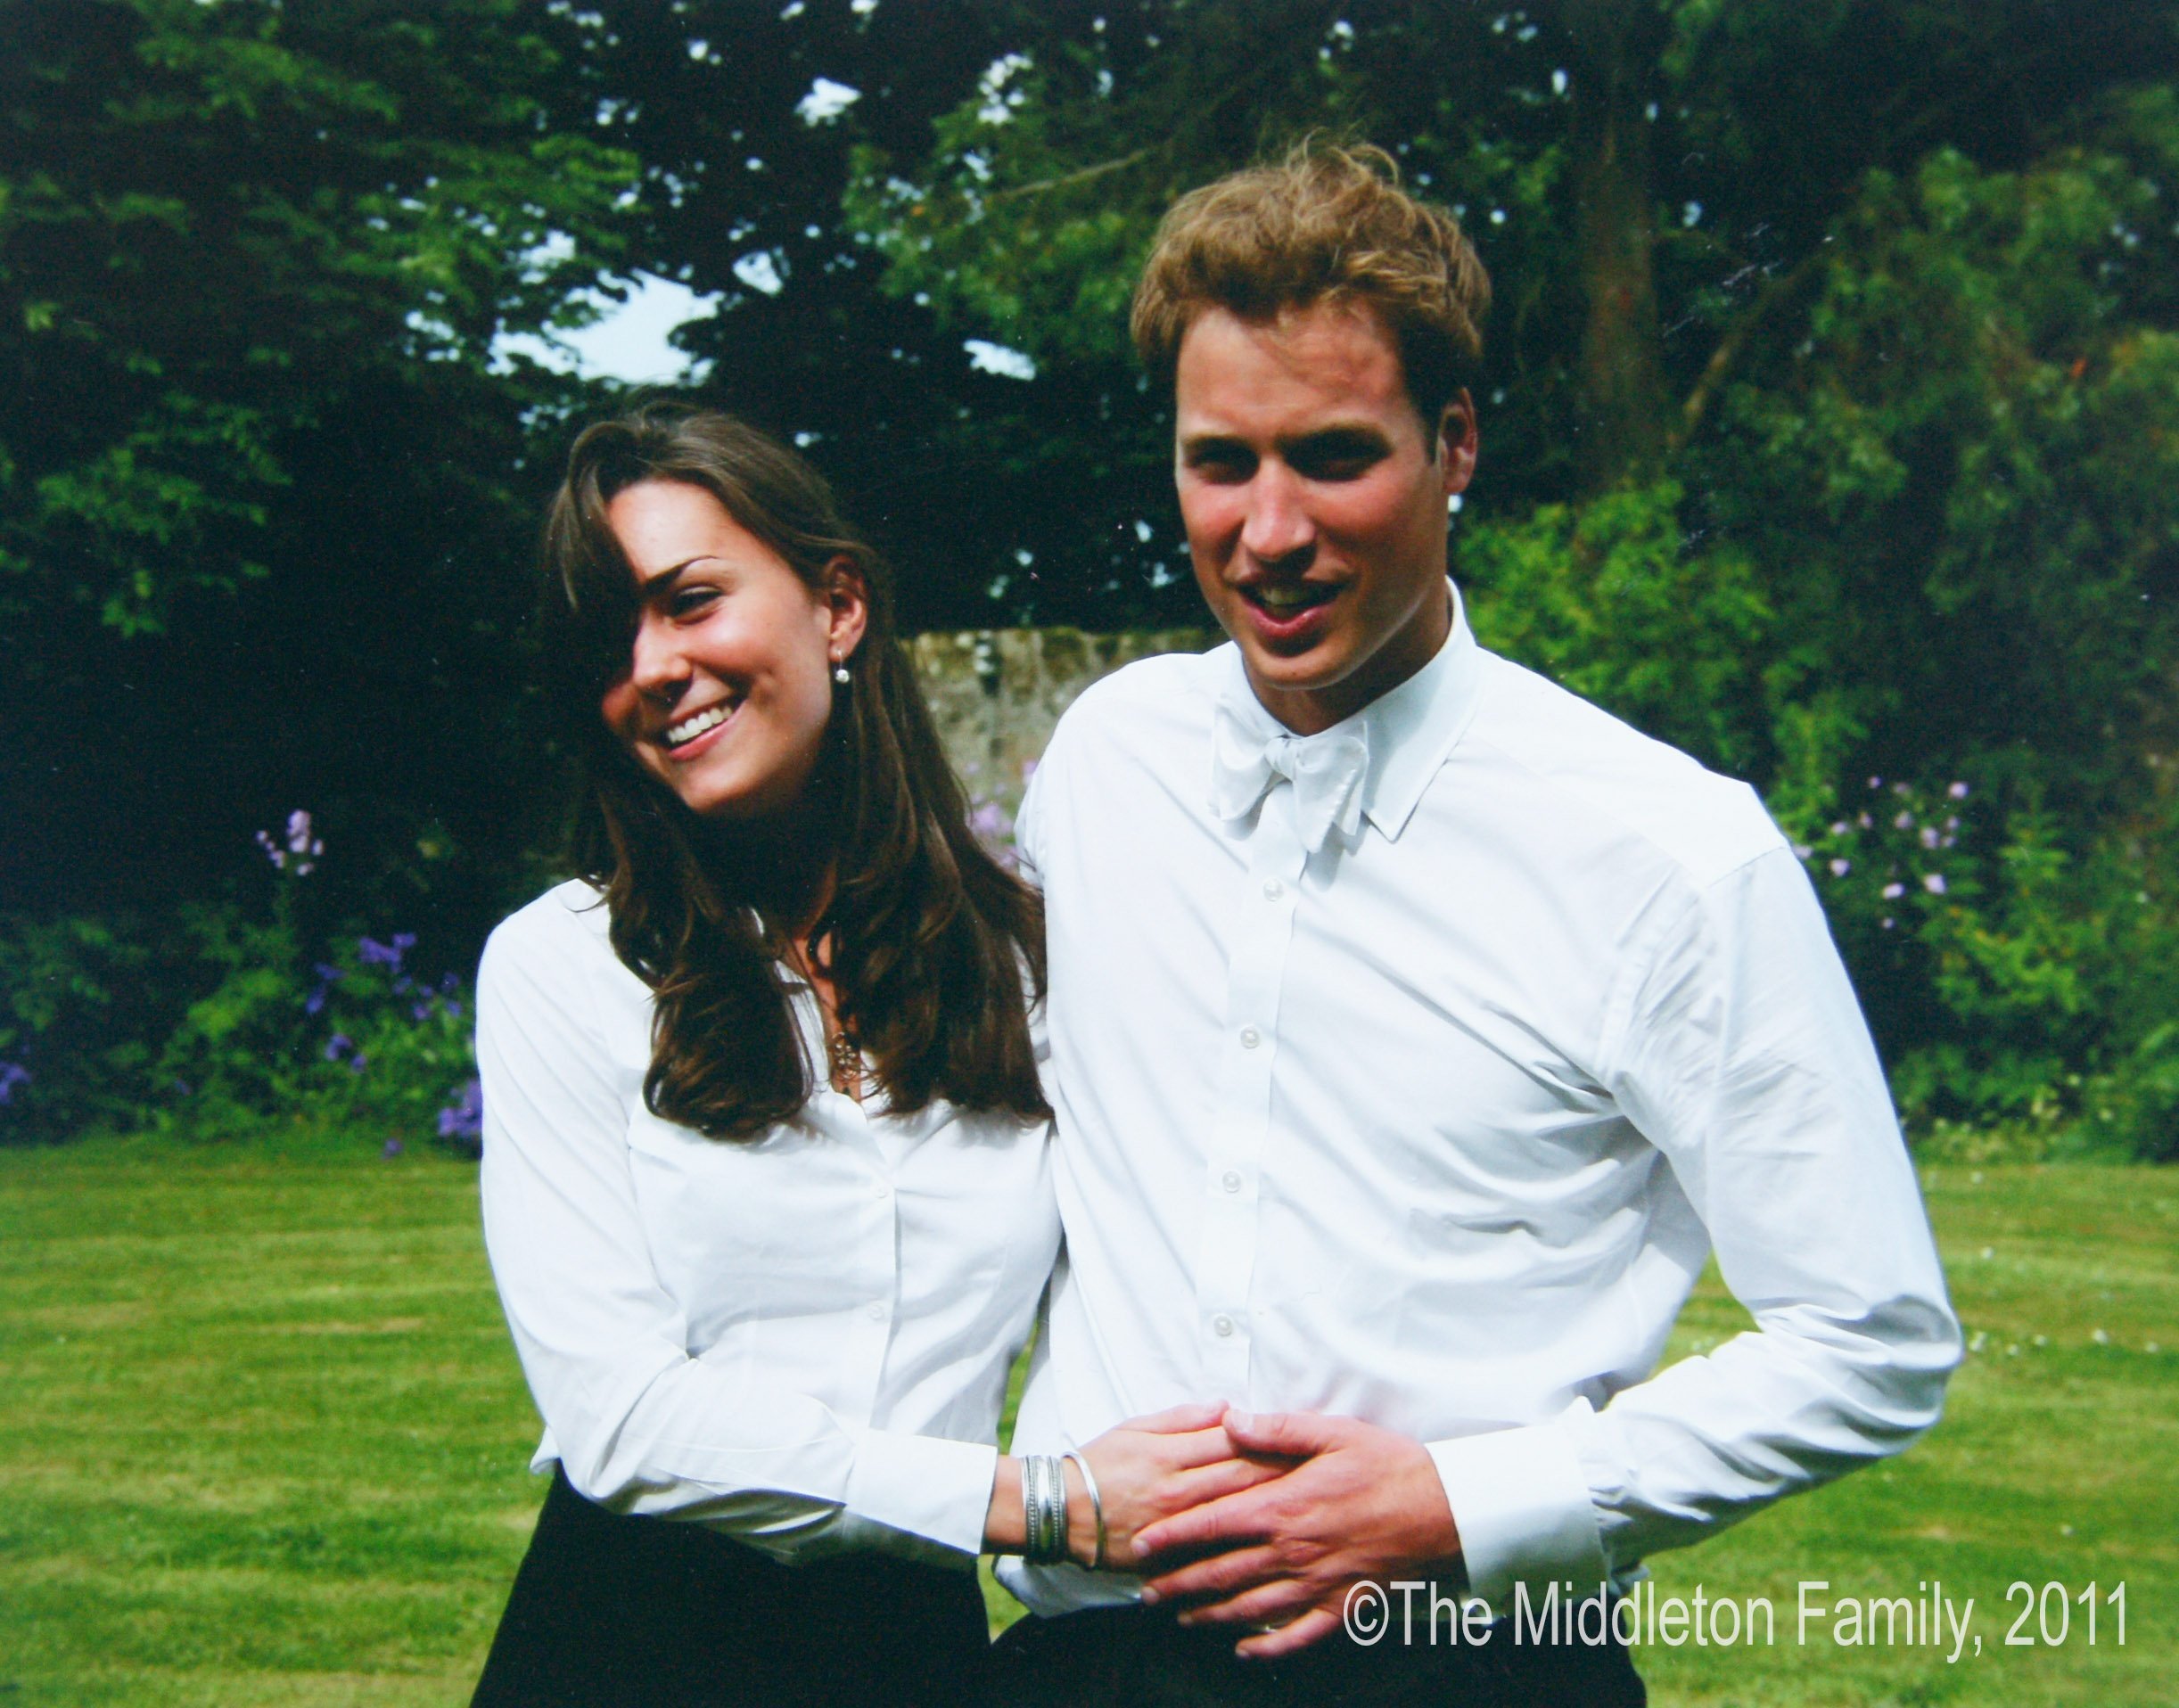 Prince William and Catherine Middleton at St Andrew's University in St Andrew's on June 23, 2005 in Scotland | Photo: Getty Images